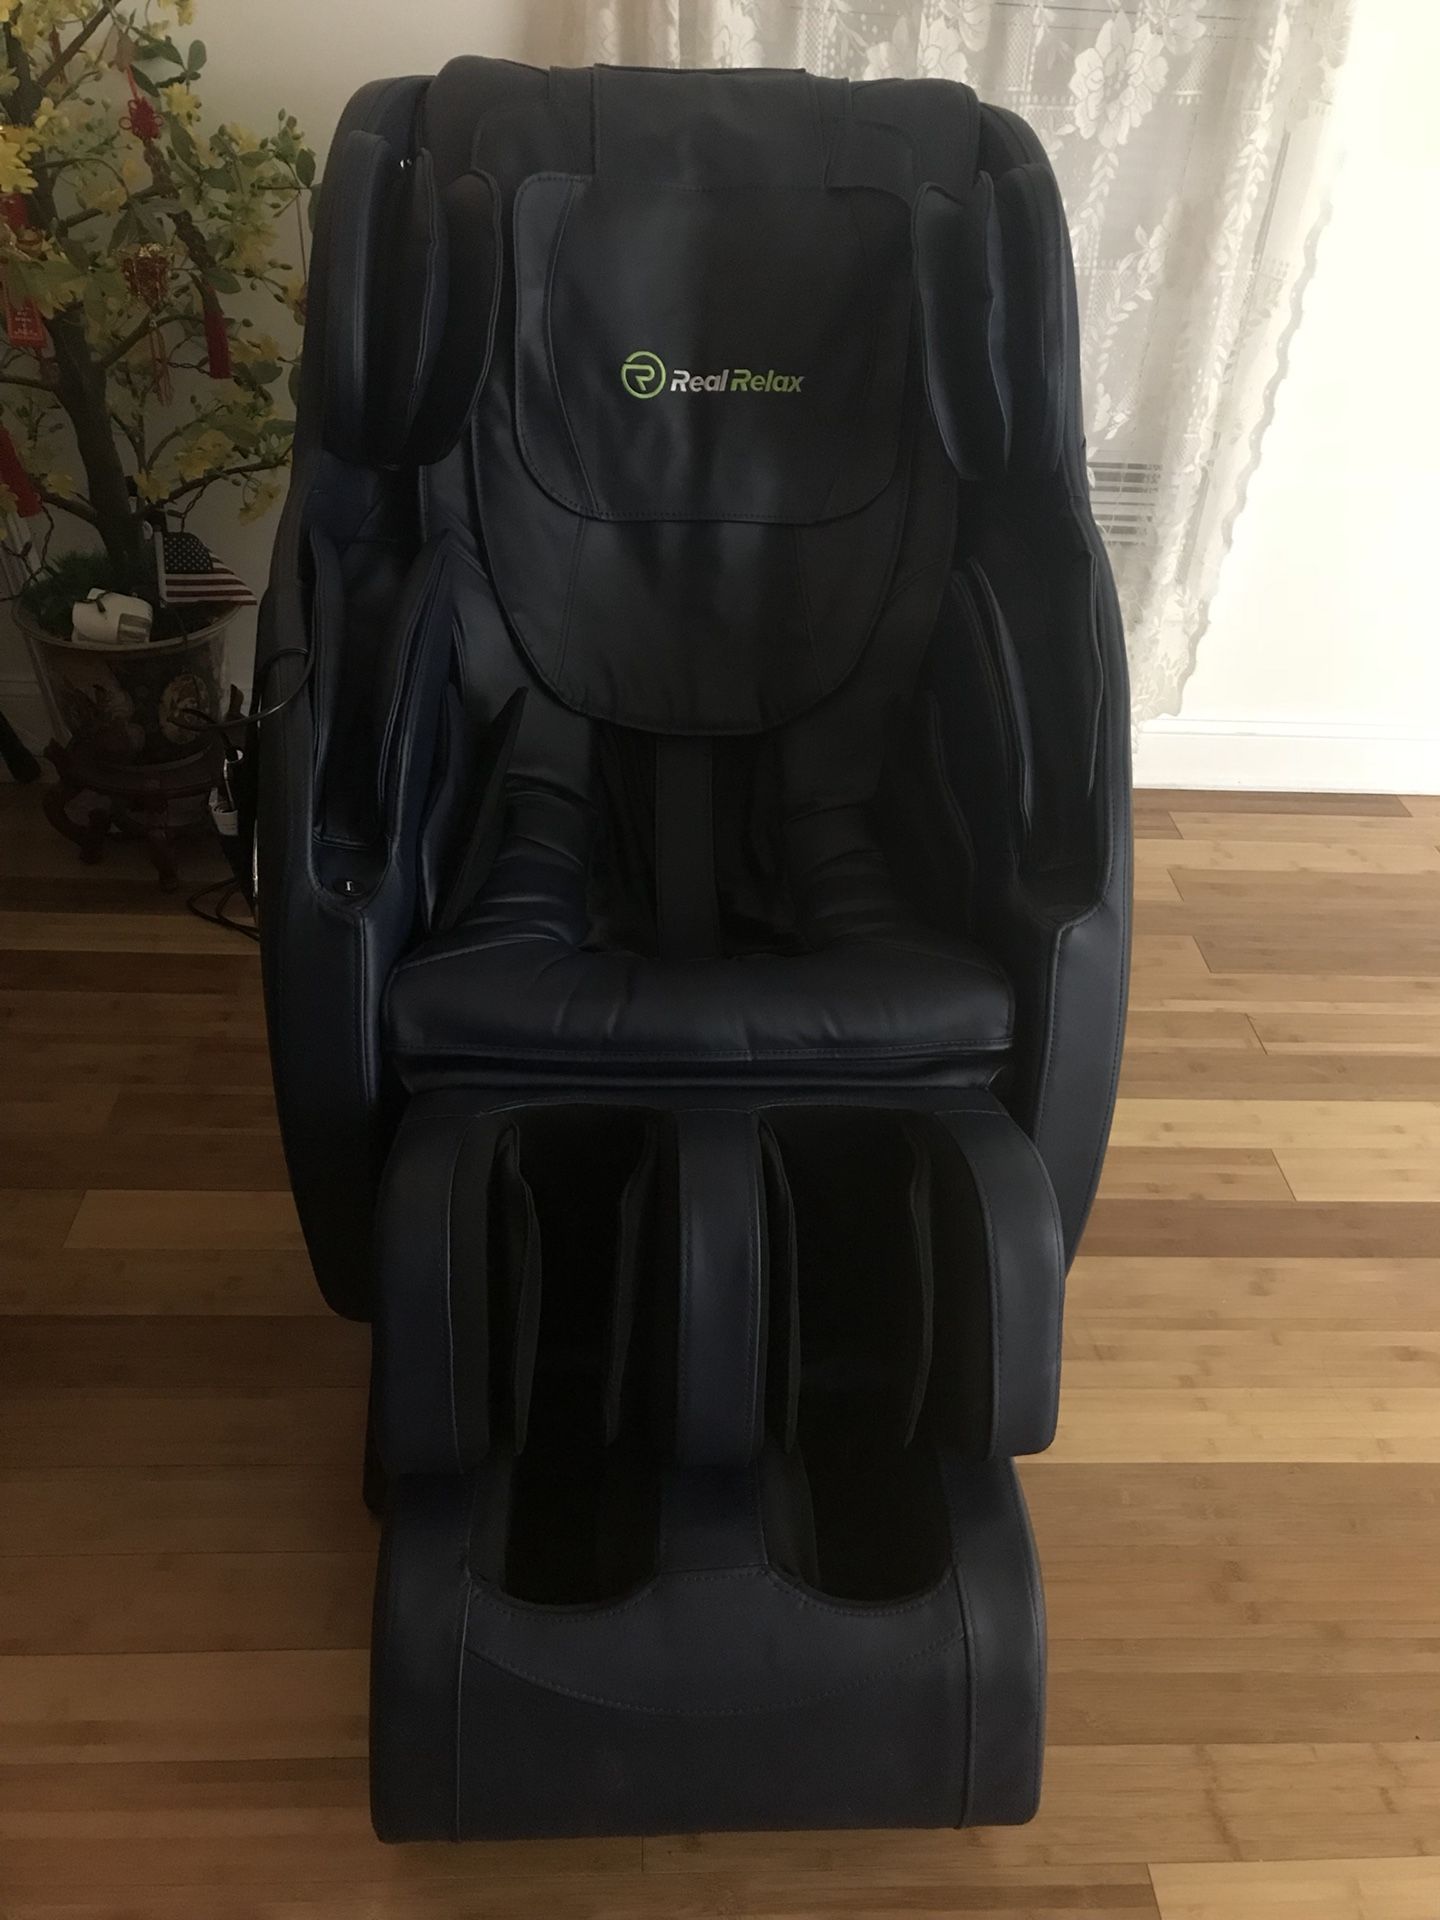 Real relax sl track massage chair with robot hand zero full